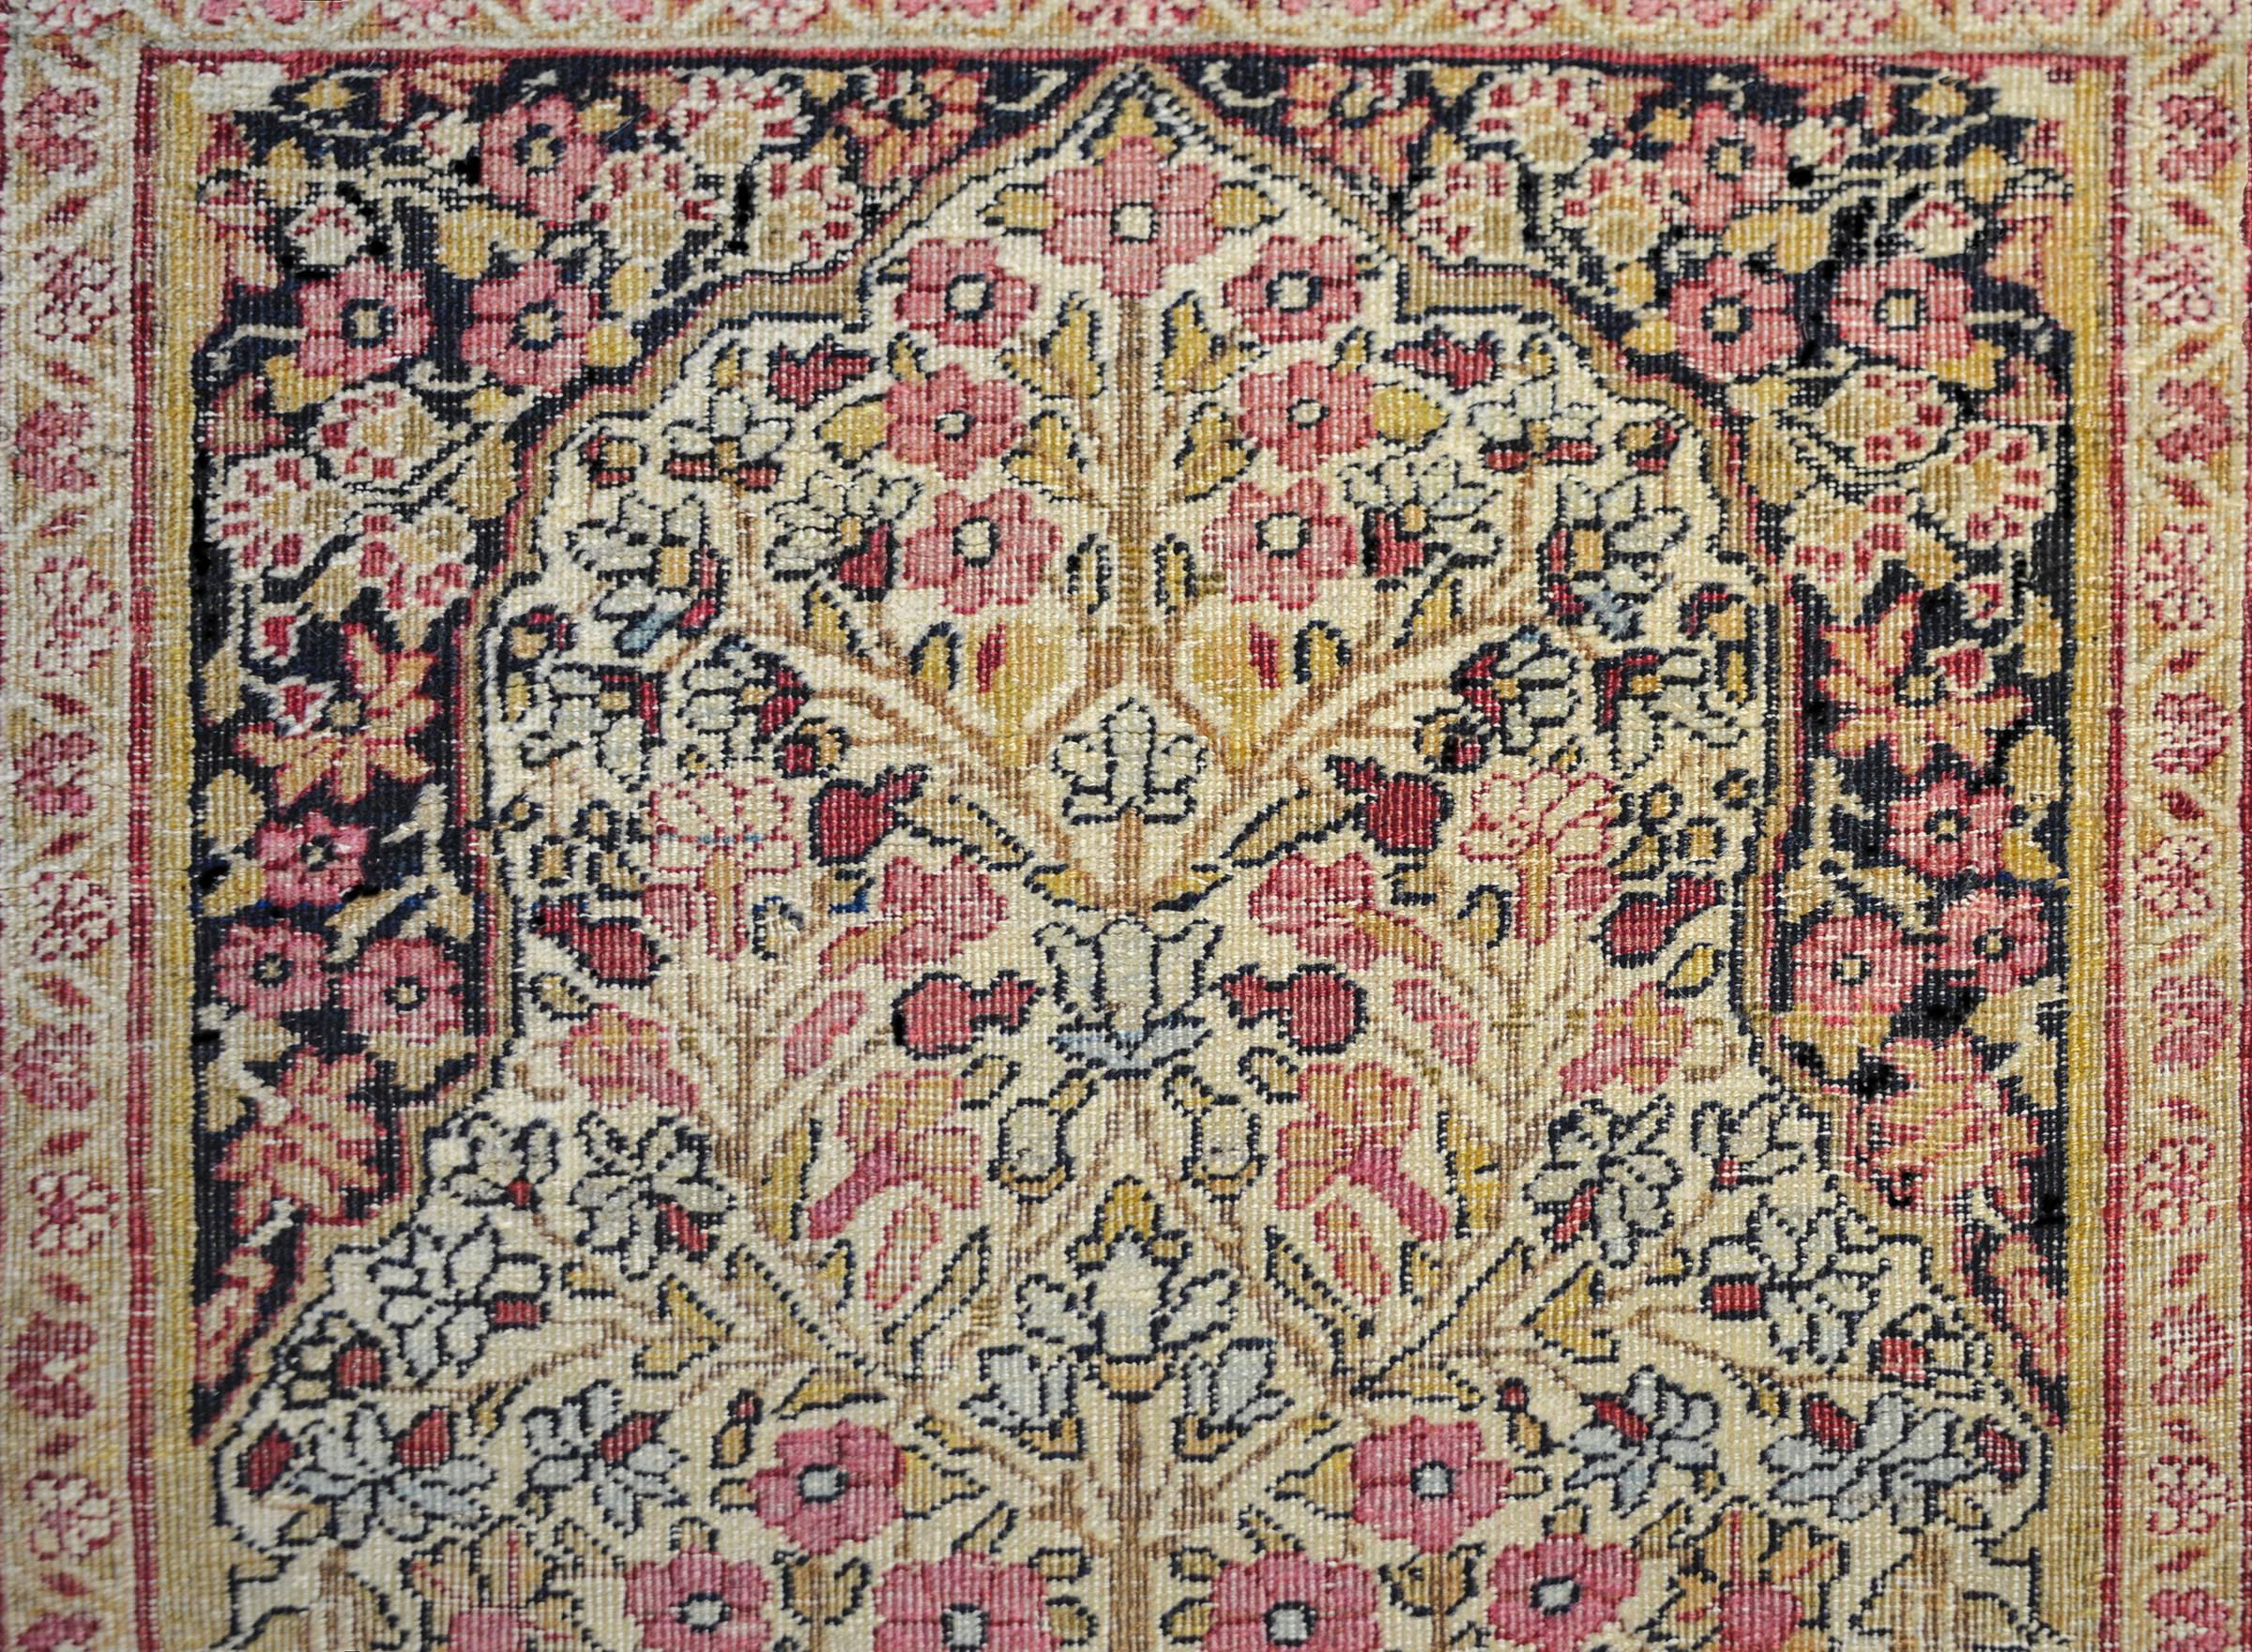 A beautiful late 19th century Persian Lavar Kirman prayer rug with a wonderful densely woven tree-of-life containing myriad variety blossoming flowers amidst a field with a single cypress tree at the bottom. The border is typical, with a densely